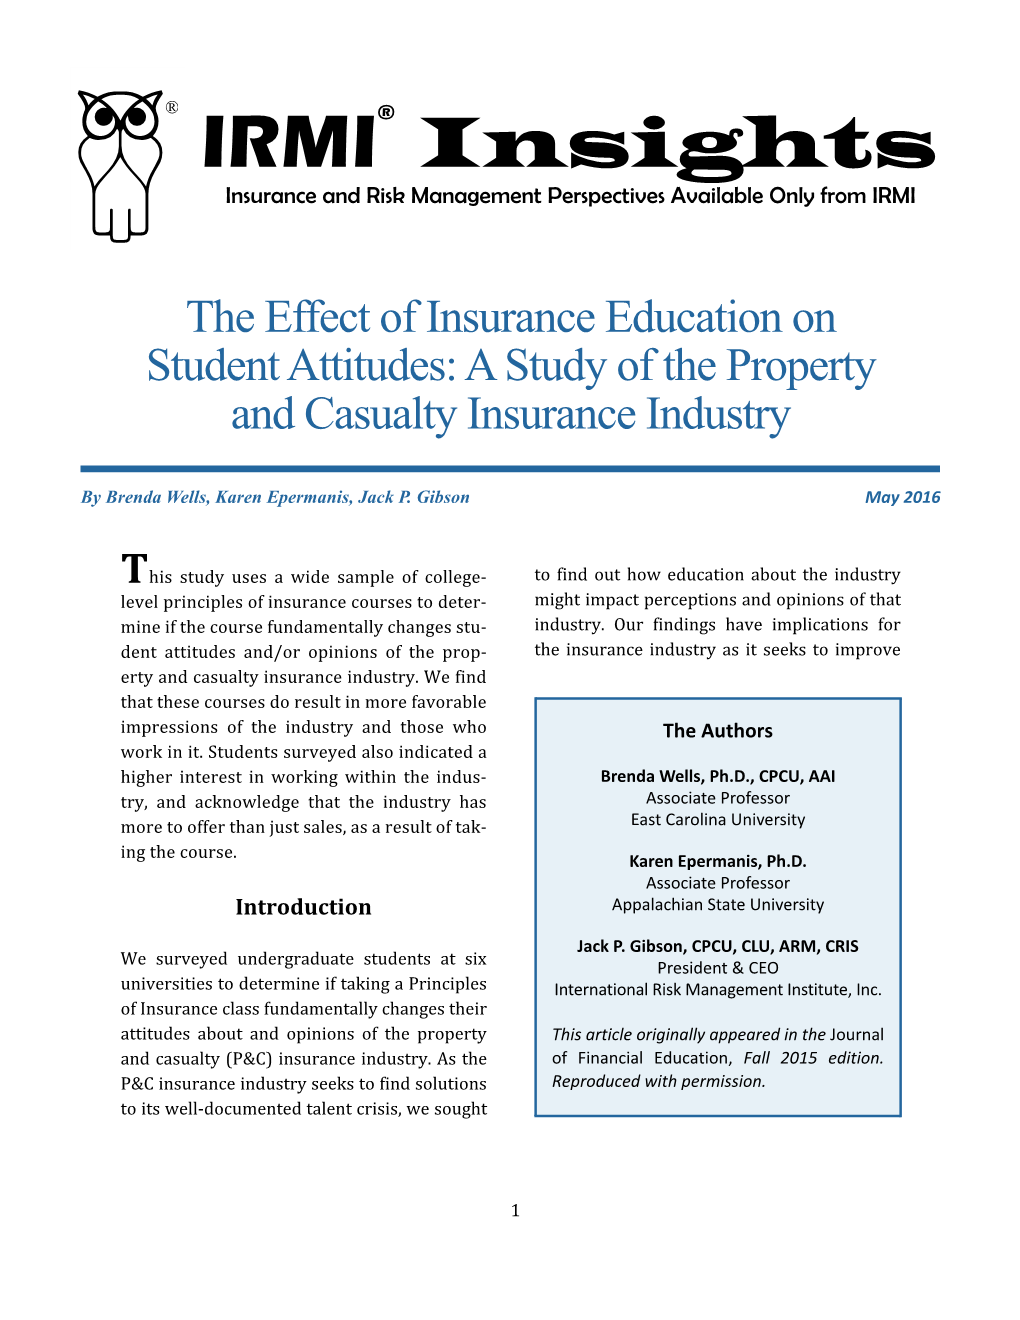 The Effect of Insurance Education on Student Attitudes: a Study of the Property and Casualty Insurance Industry